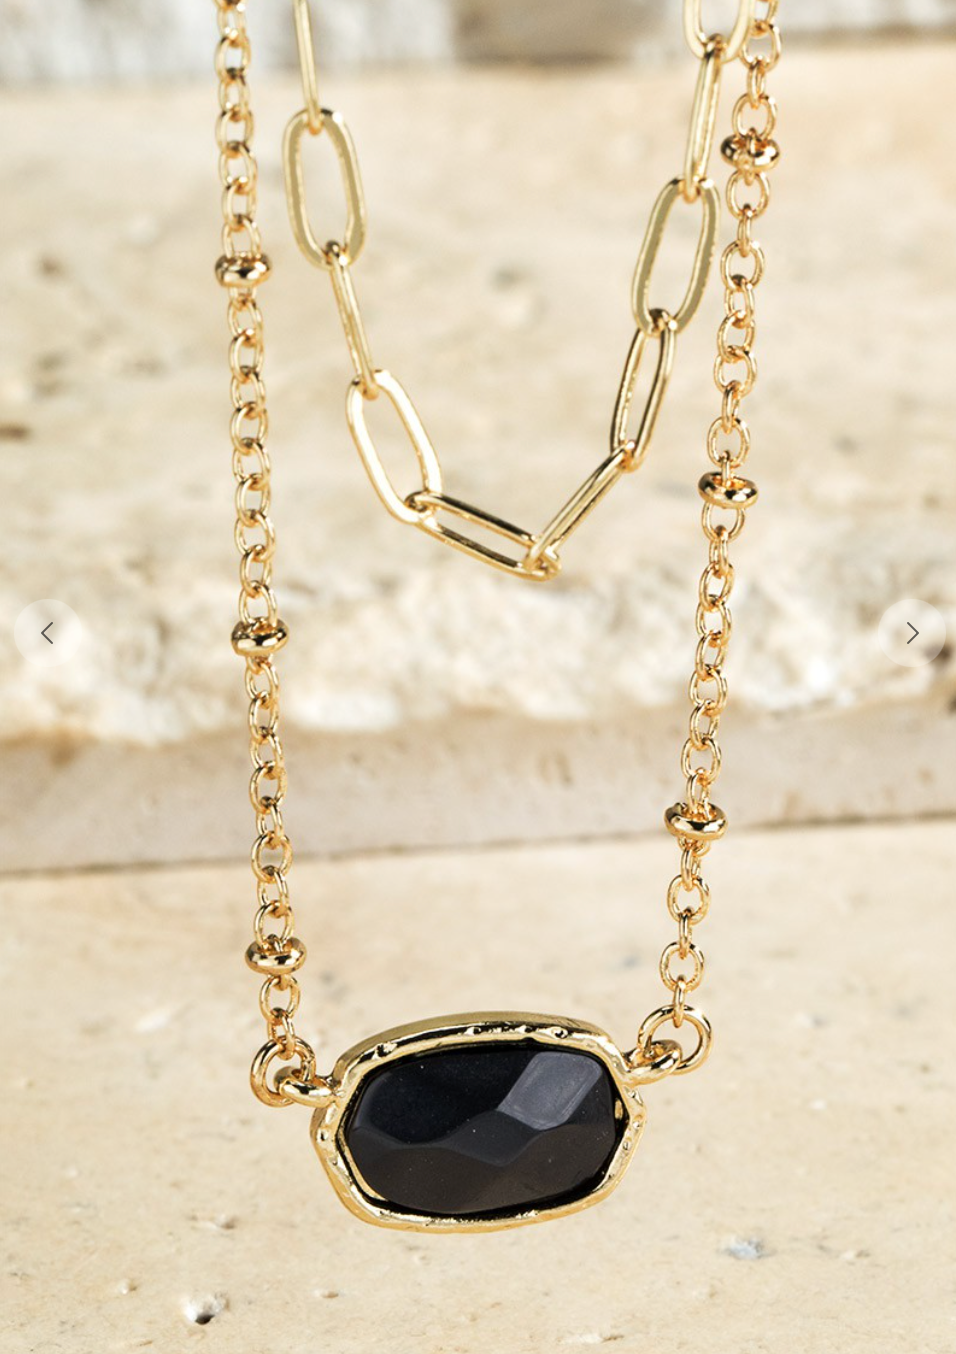 Dainty double layer necklace with black stone.